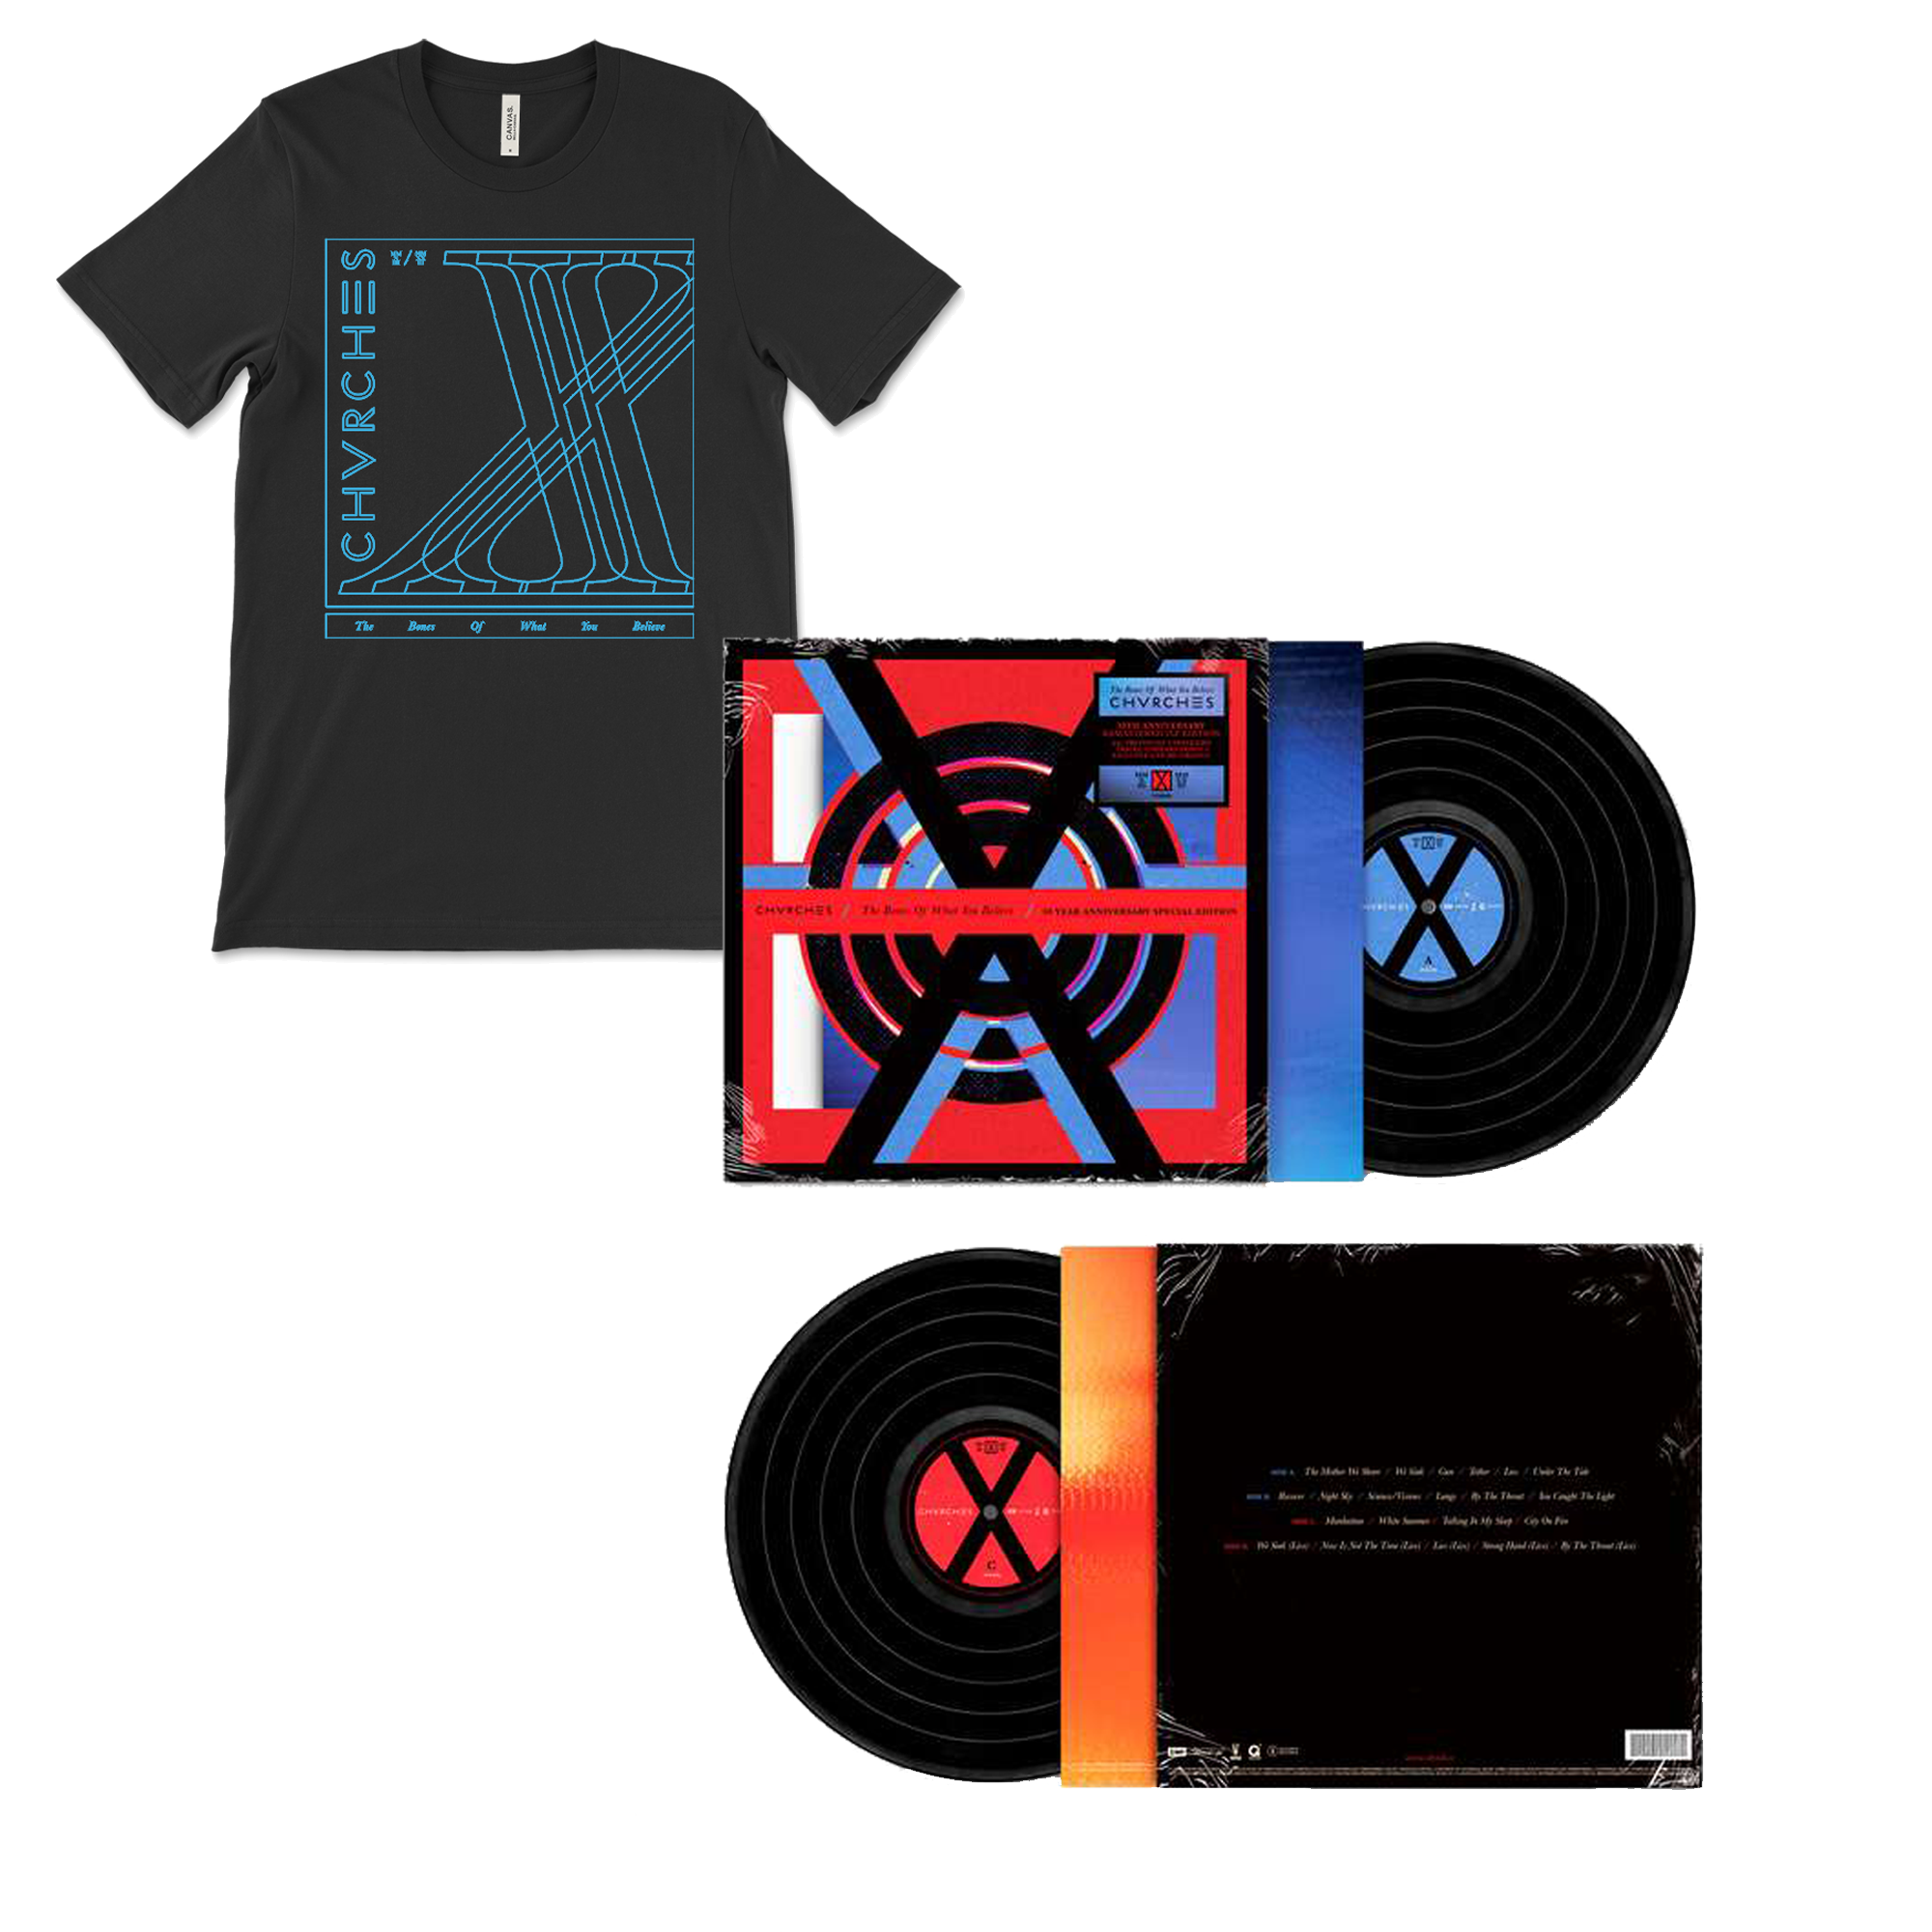 The Bones Of What You Believe (10th Anniversary Edition): Vinyl 2LP & Exclusive T-Shirt